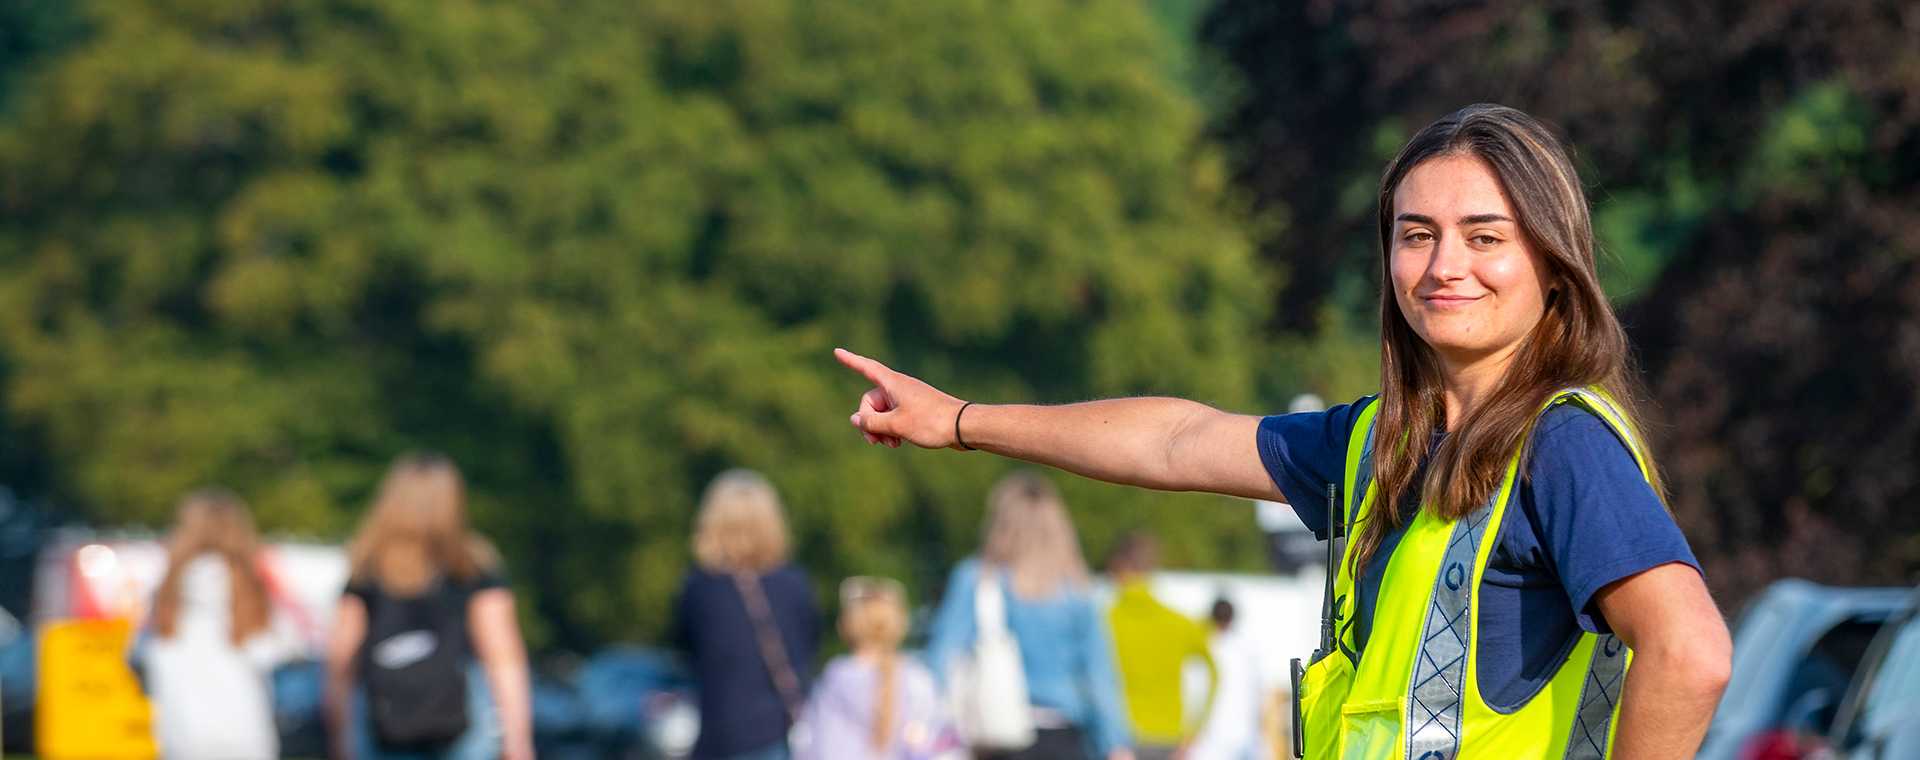 A Tracsis Events Marshal directing traffic